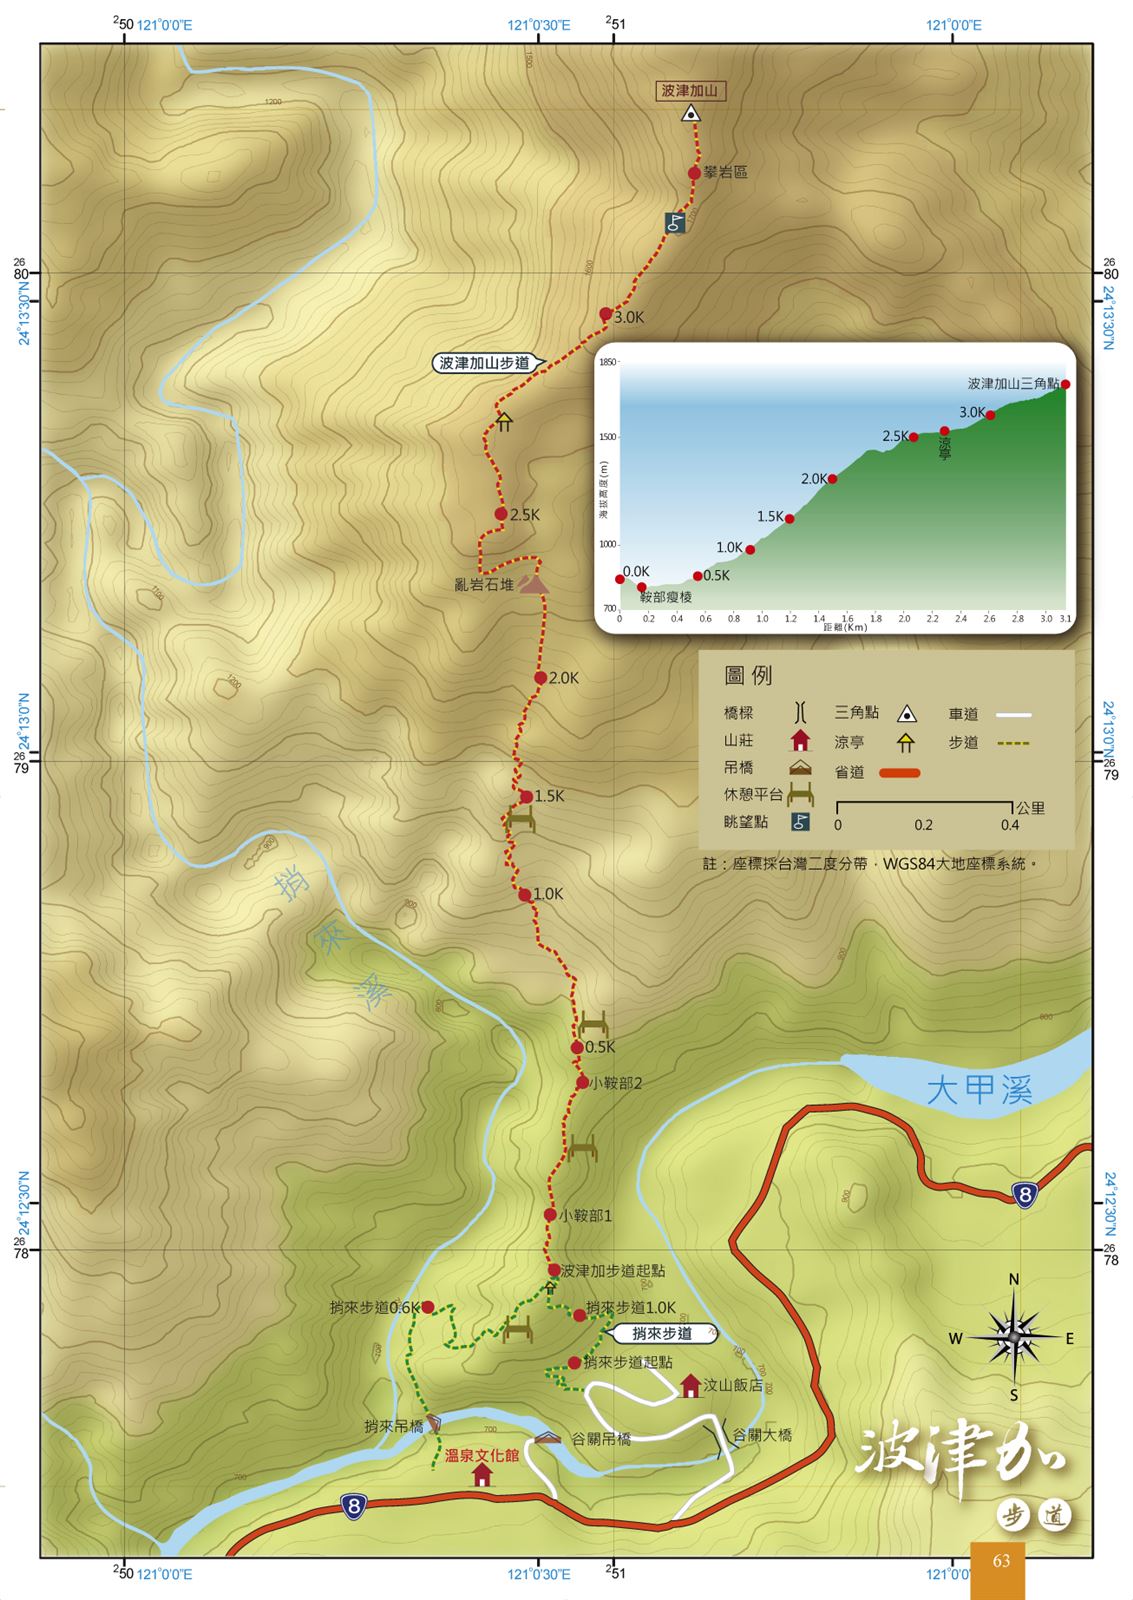 Trail route